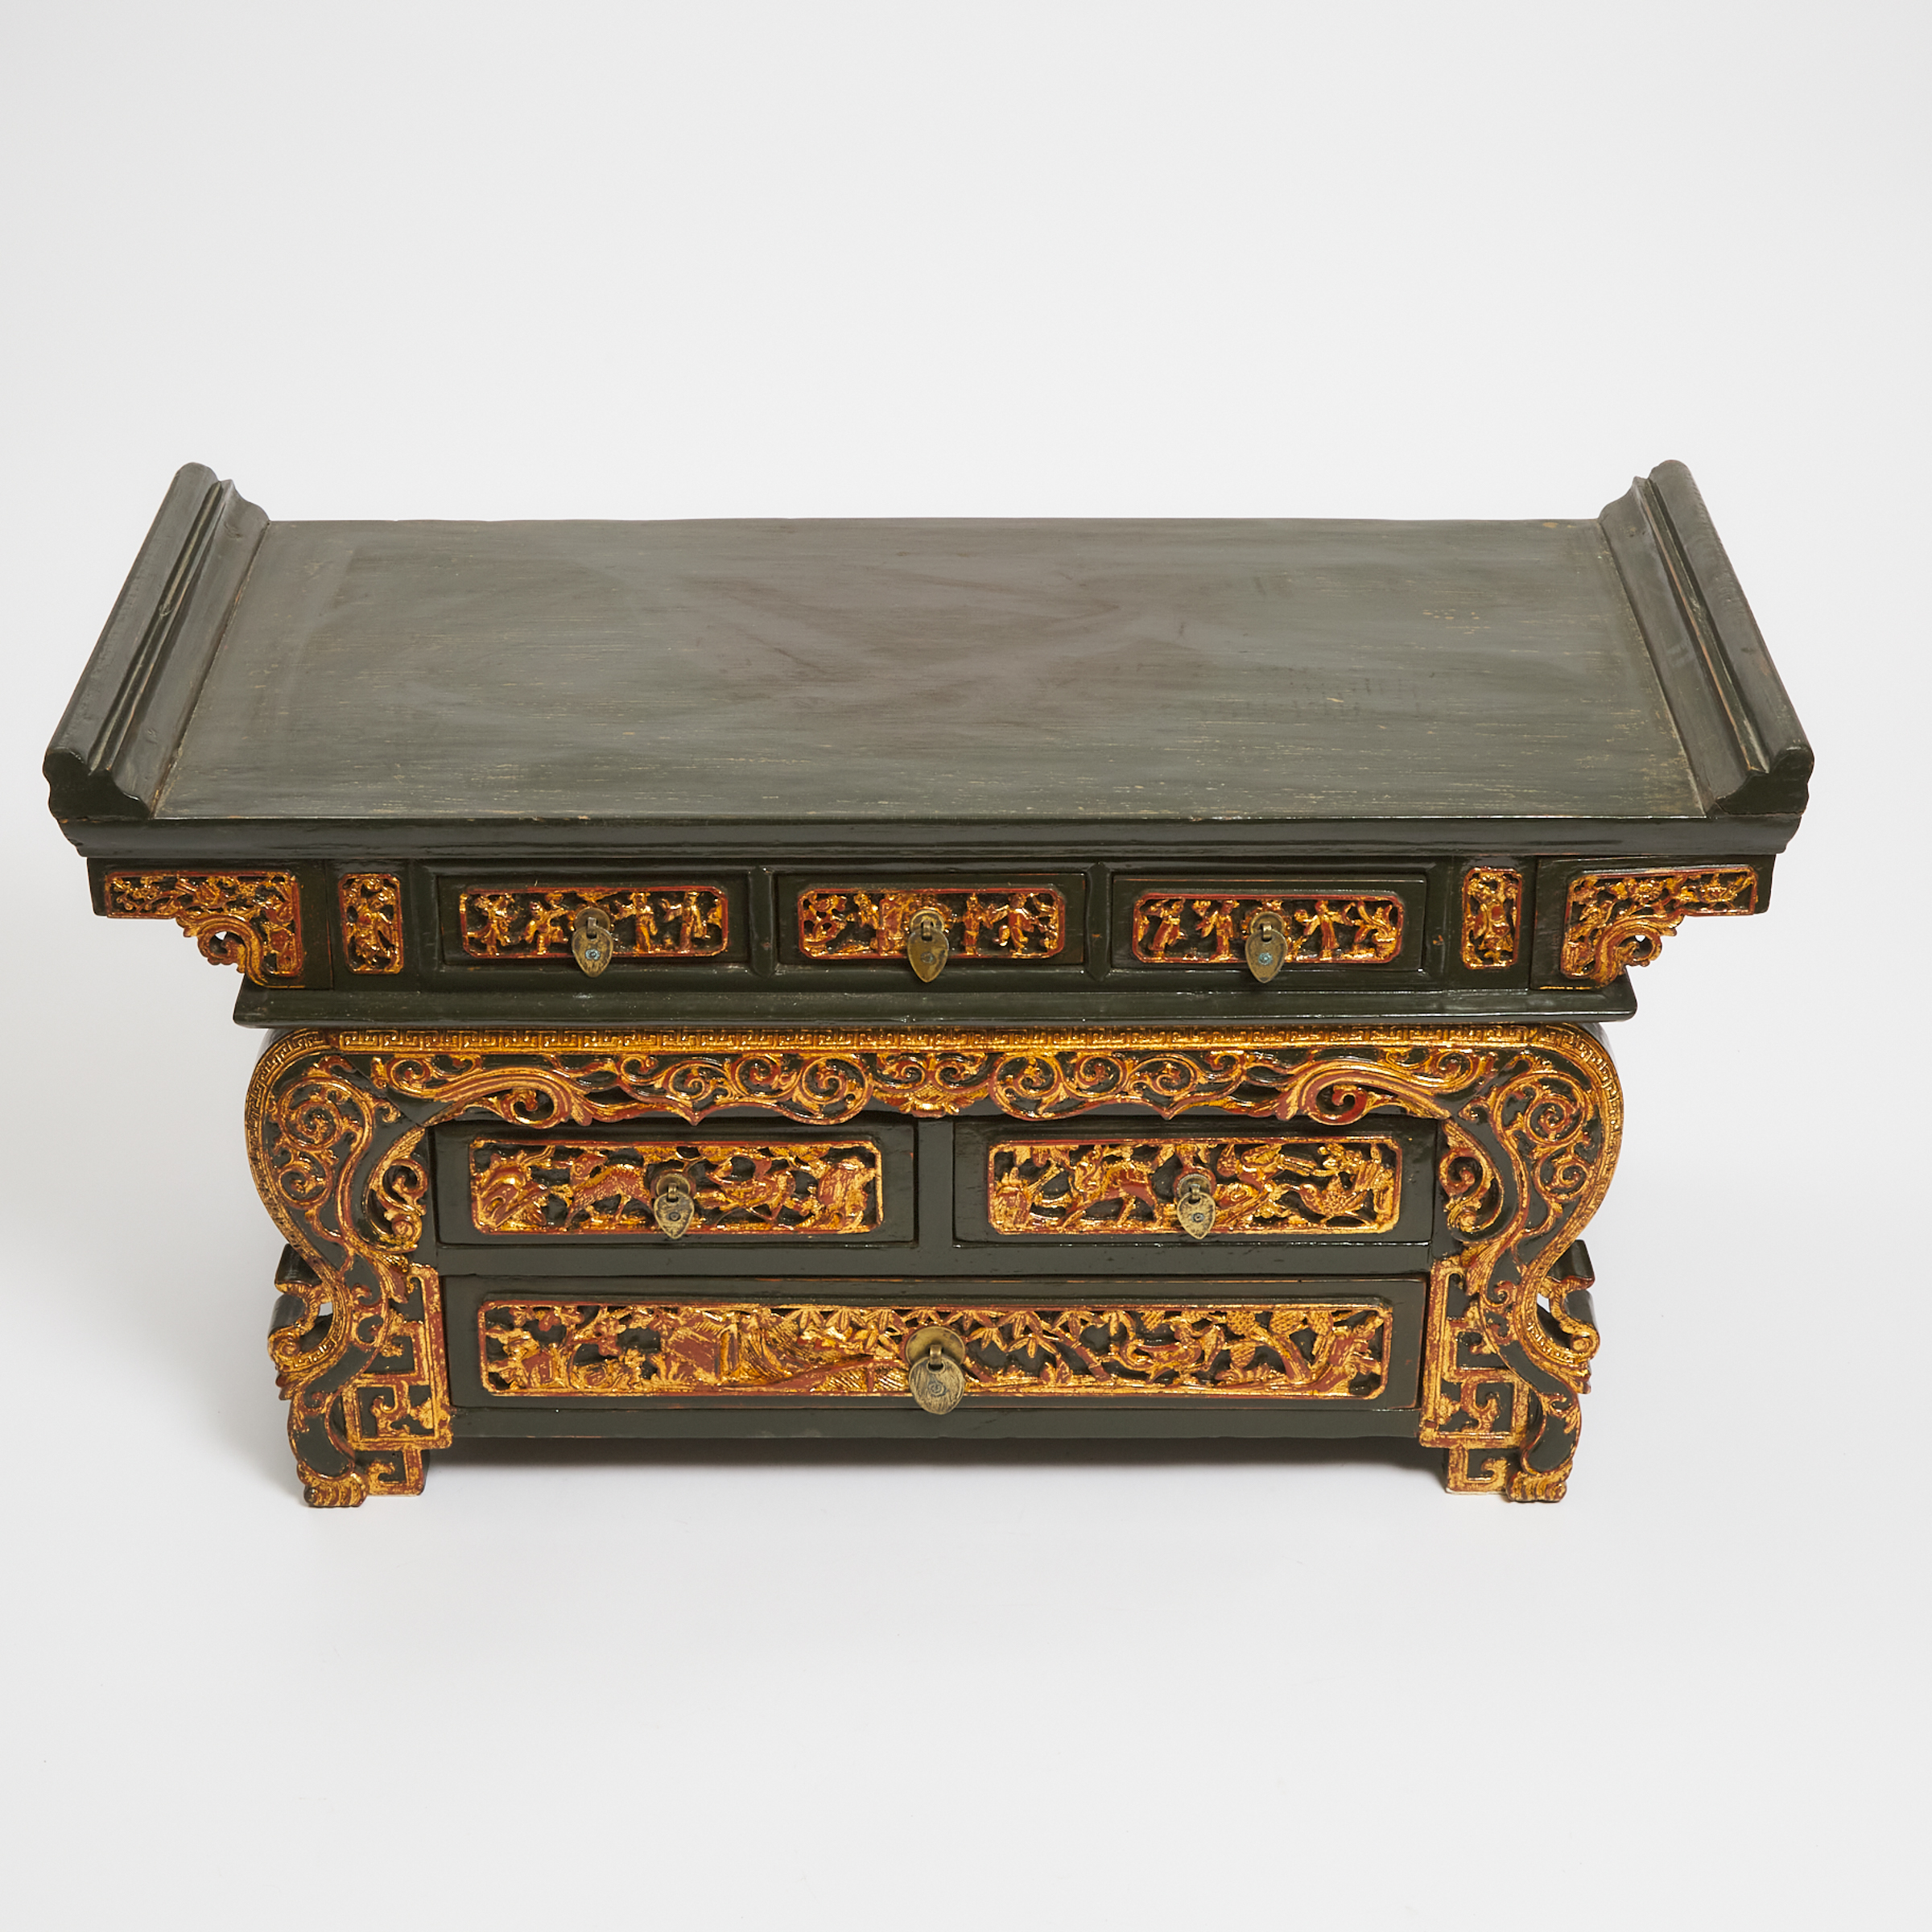 A Small Chinese Lacquered Altar Coffer, Qing Dynasty, 19th Century